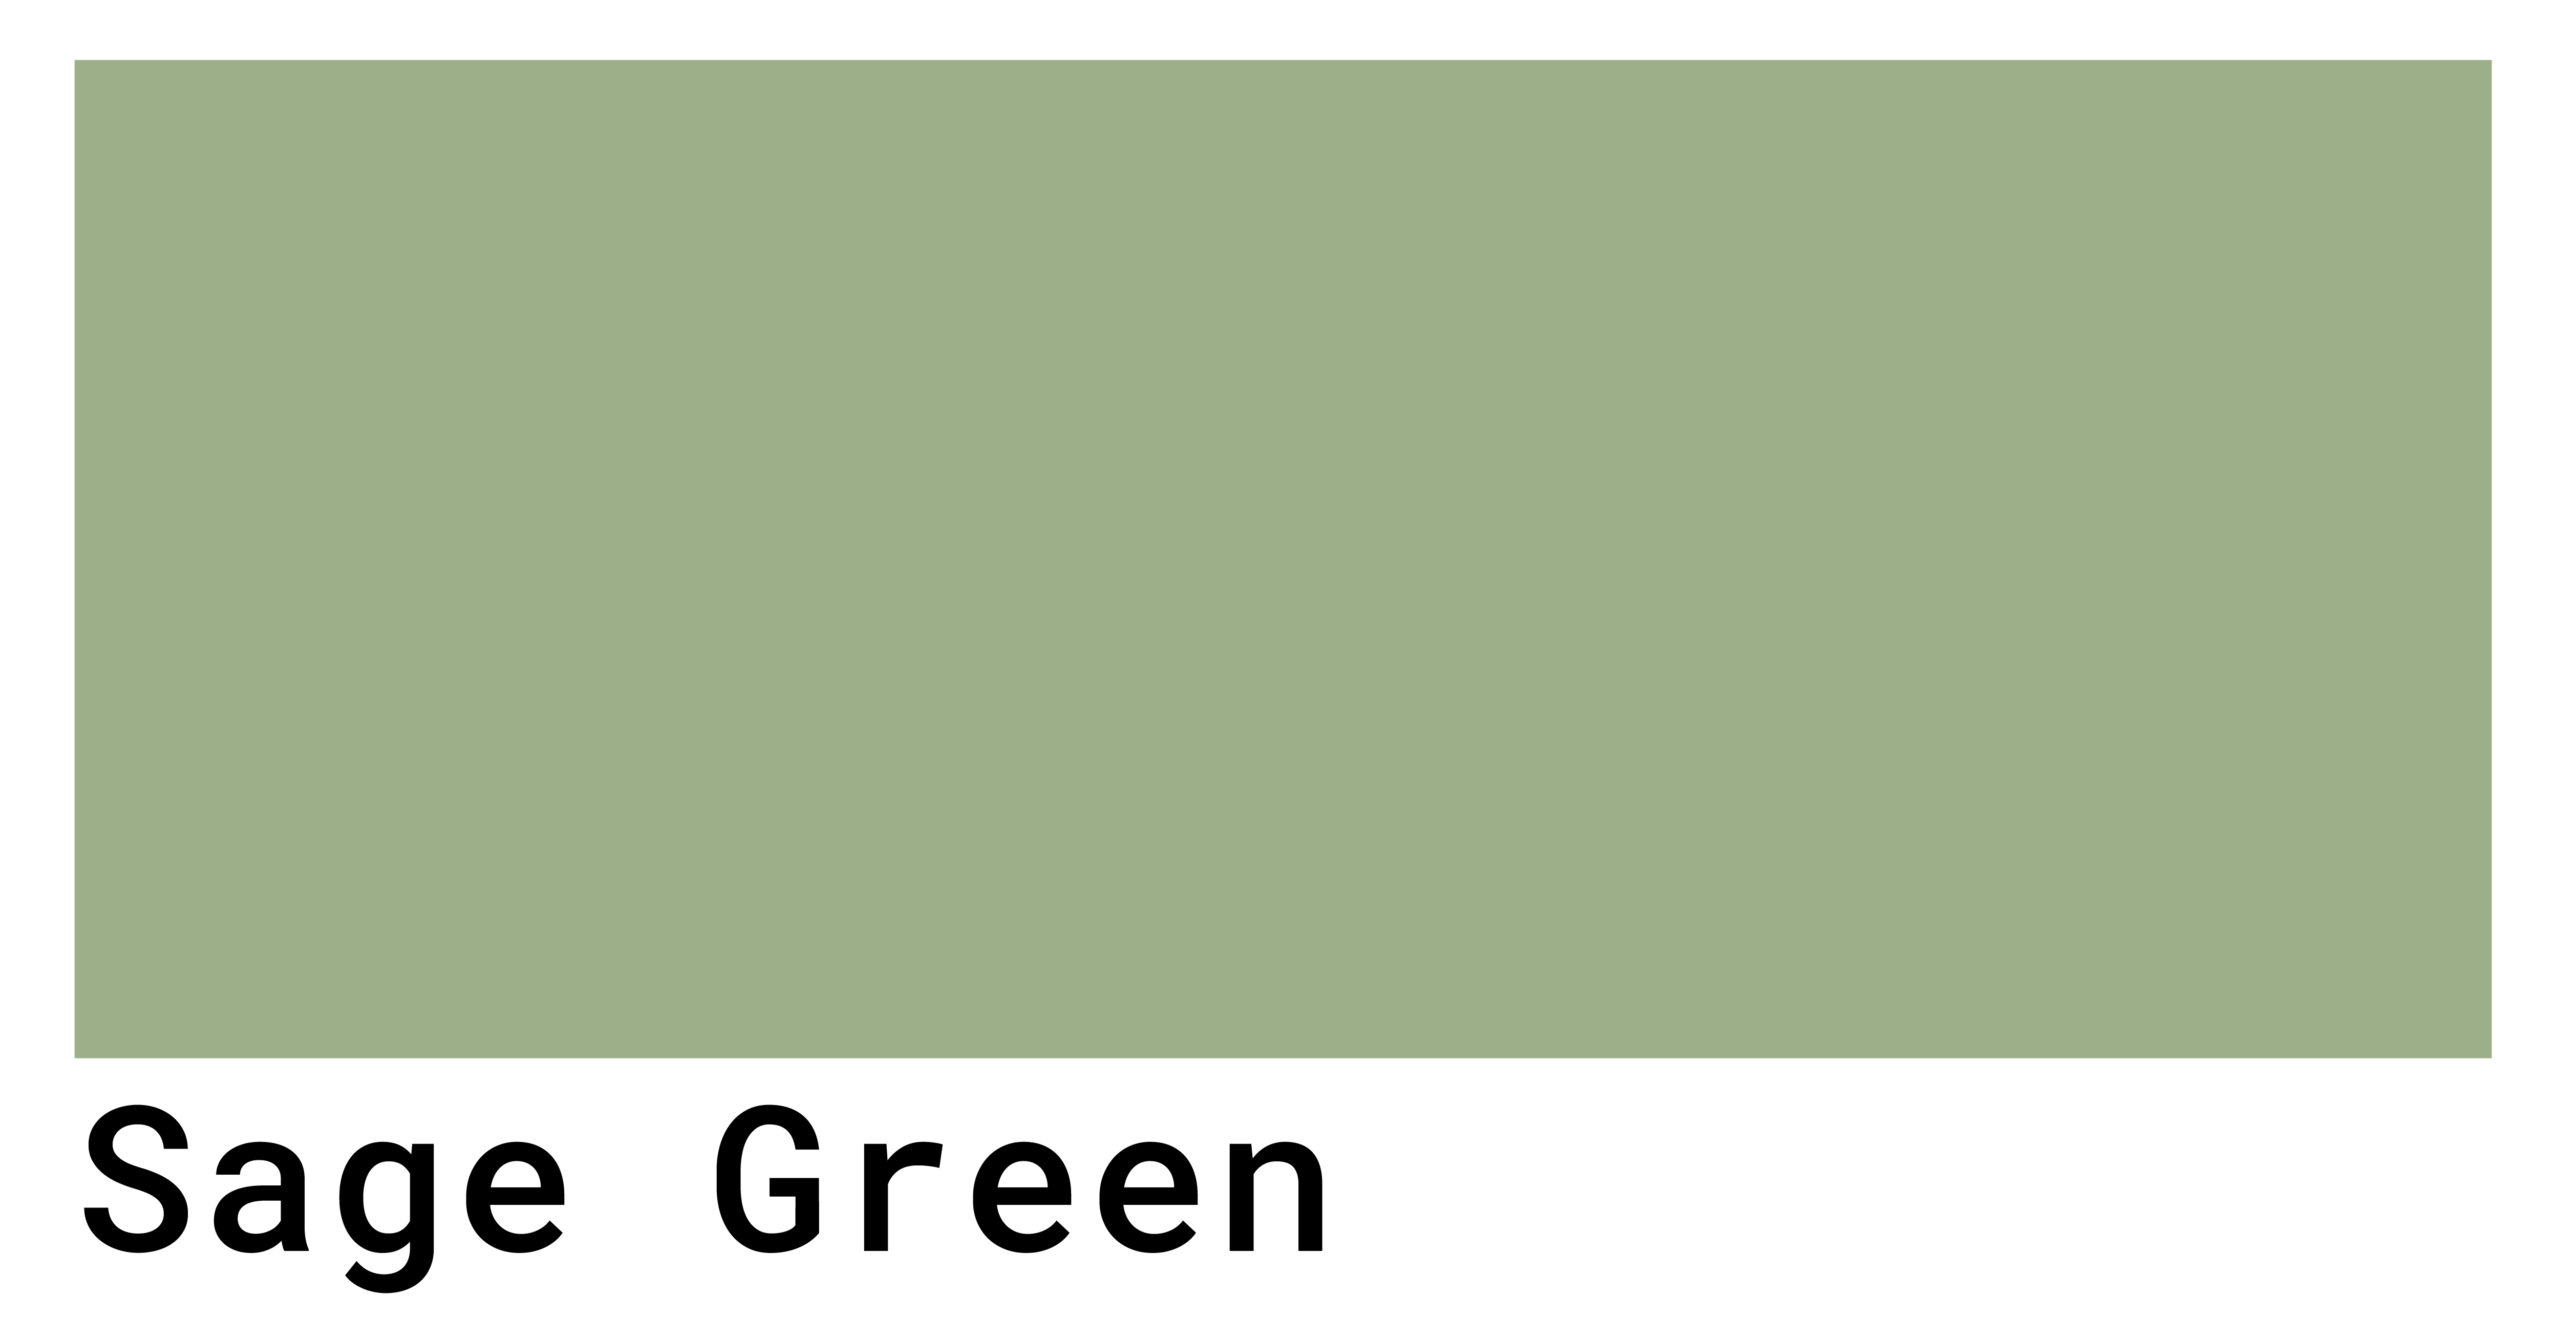 Sage Green Color Codes   The Hex, RGB and CMYK Values That You Need